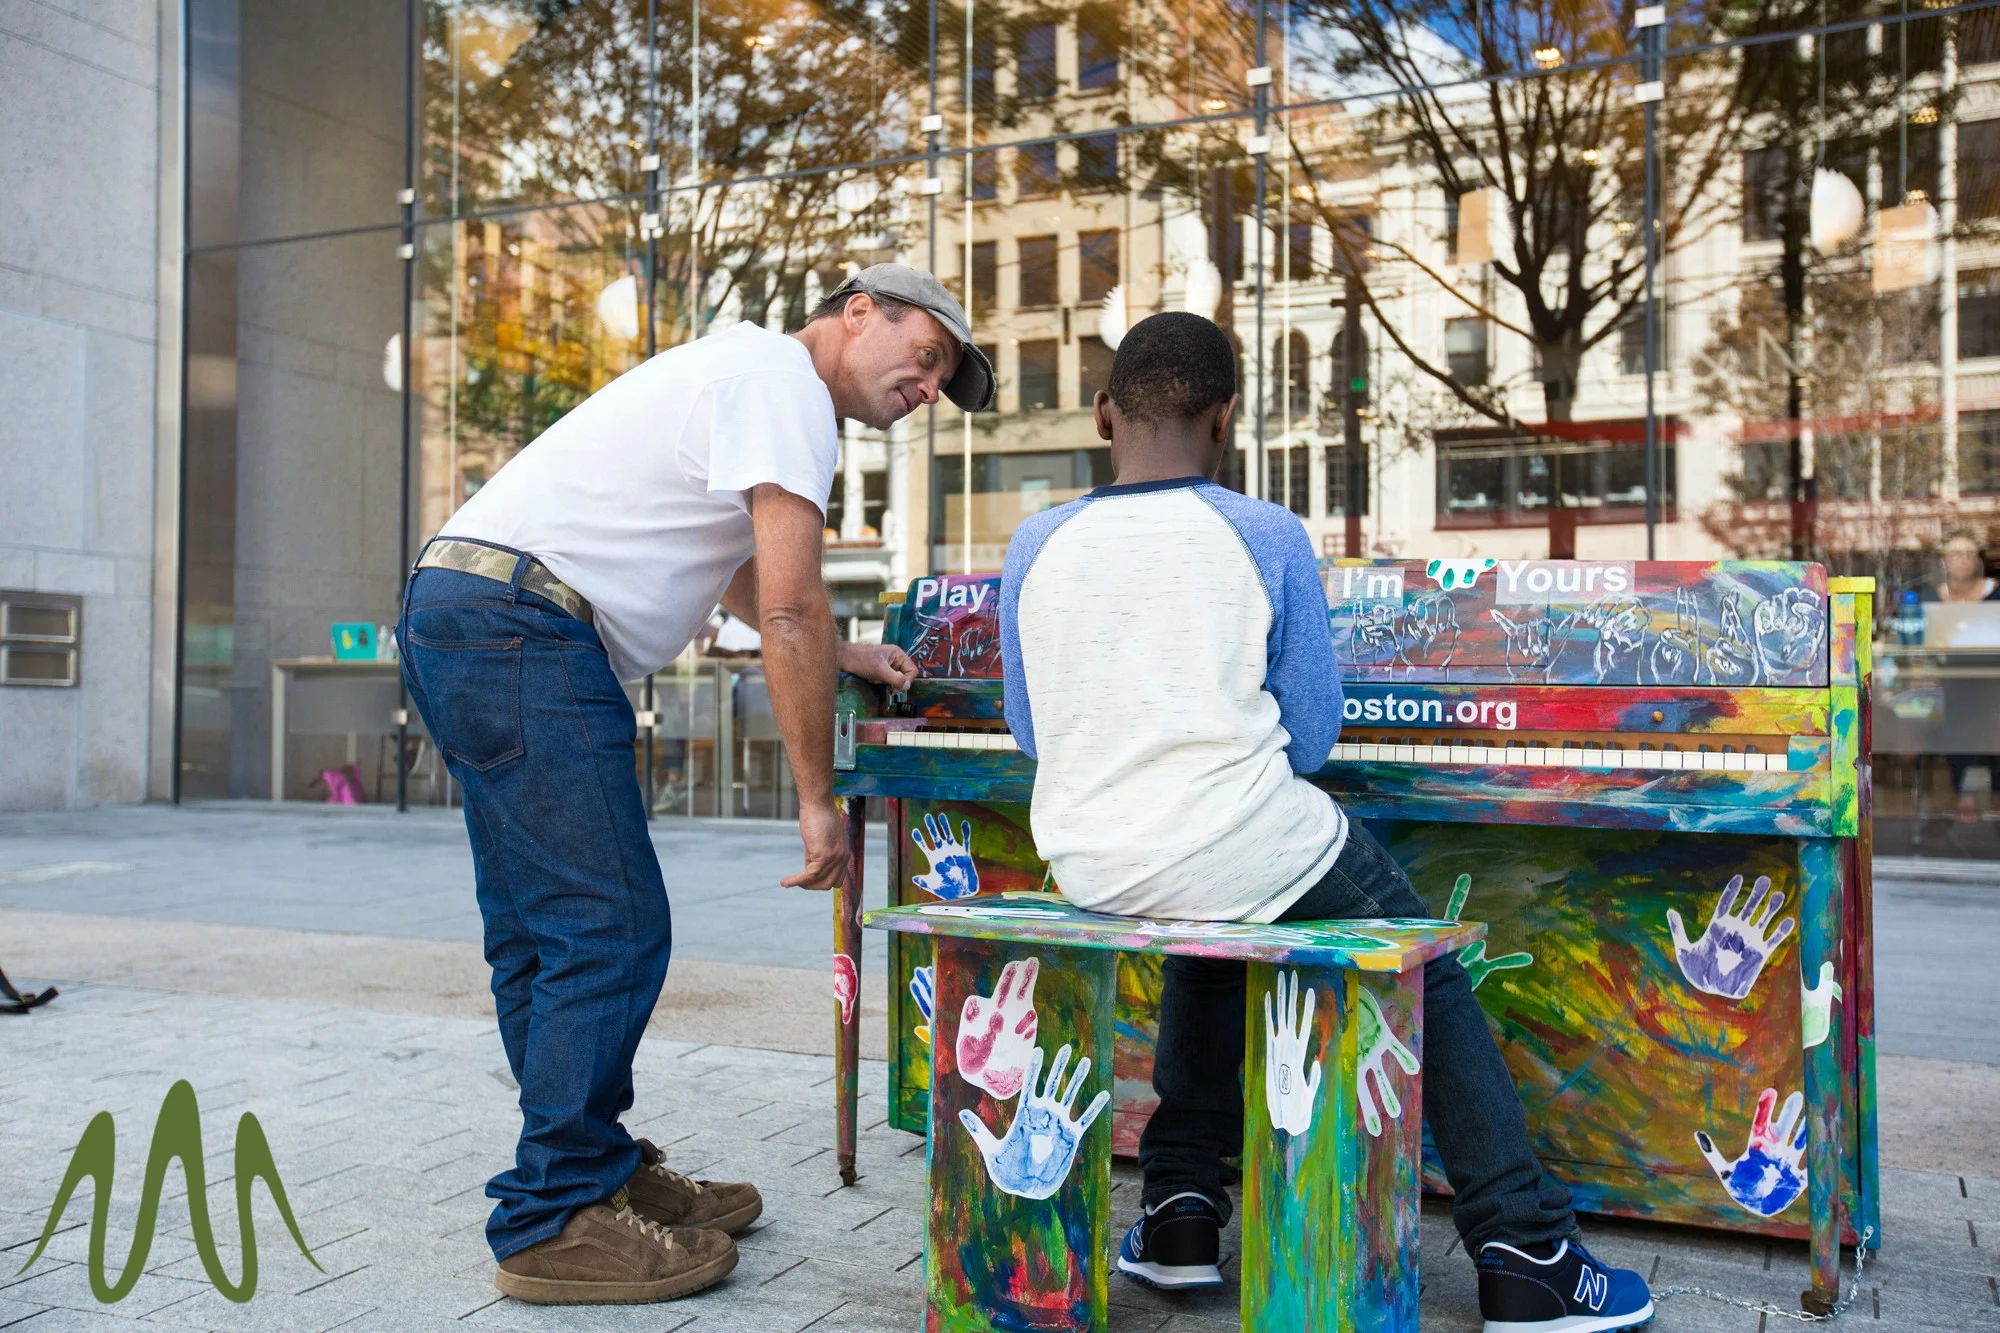 The Inspiration Of Play Me, I’m Yours Street Pianos. With Founder, Luke Jerram